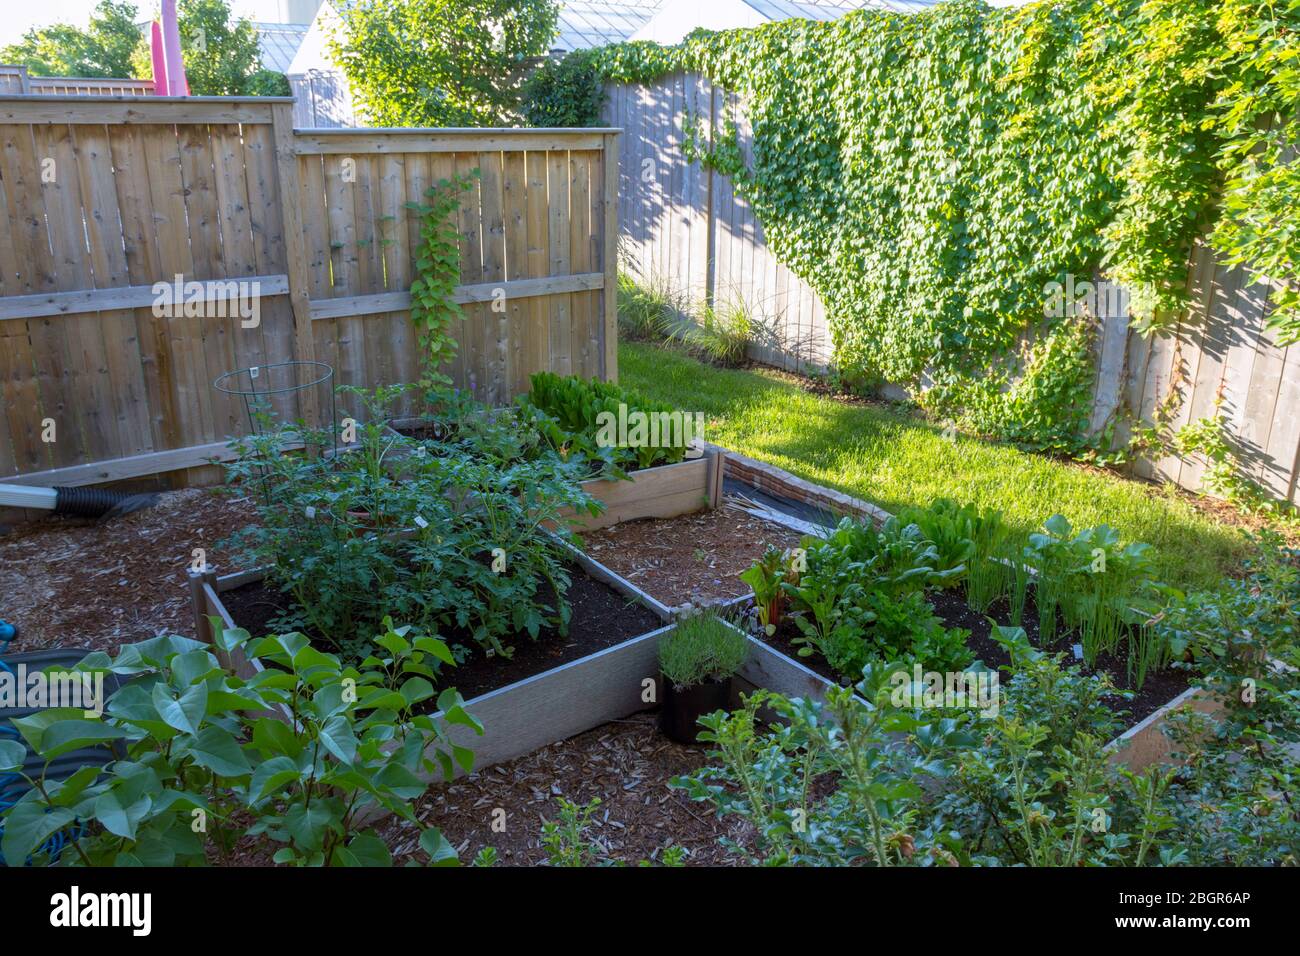 Part of the grow your own food movement, this backyard vegetable garden contains large raised beds for growing vegetables and herbs throughout summer. Stock Photo